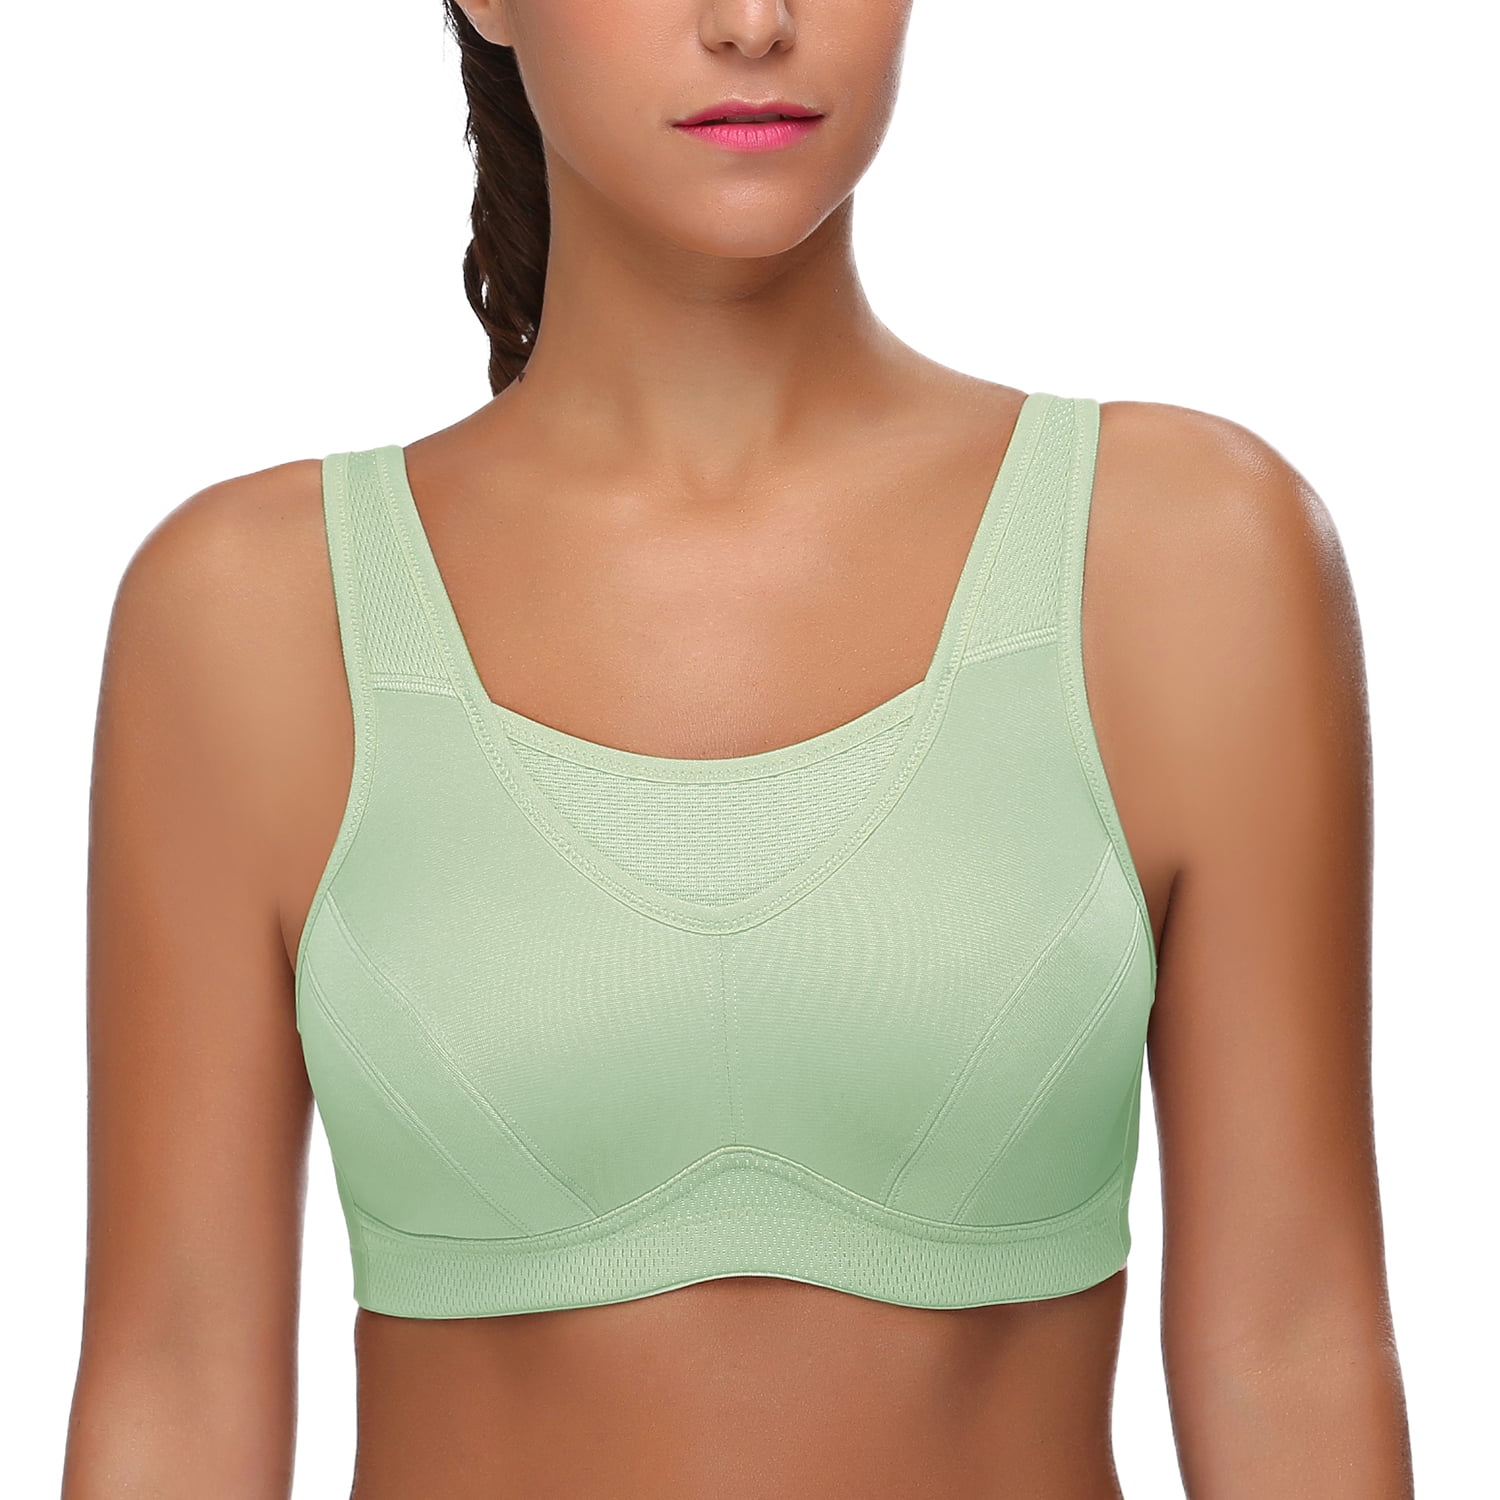 WingsLove Womens High Impact Sports Bra Wirefree Molded Cup